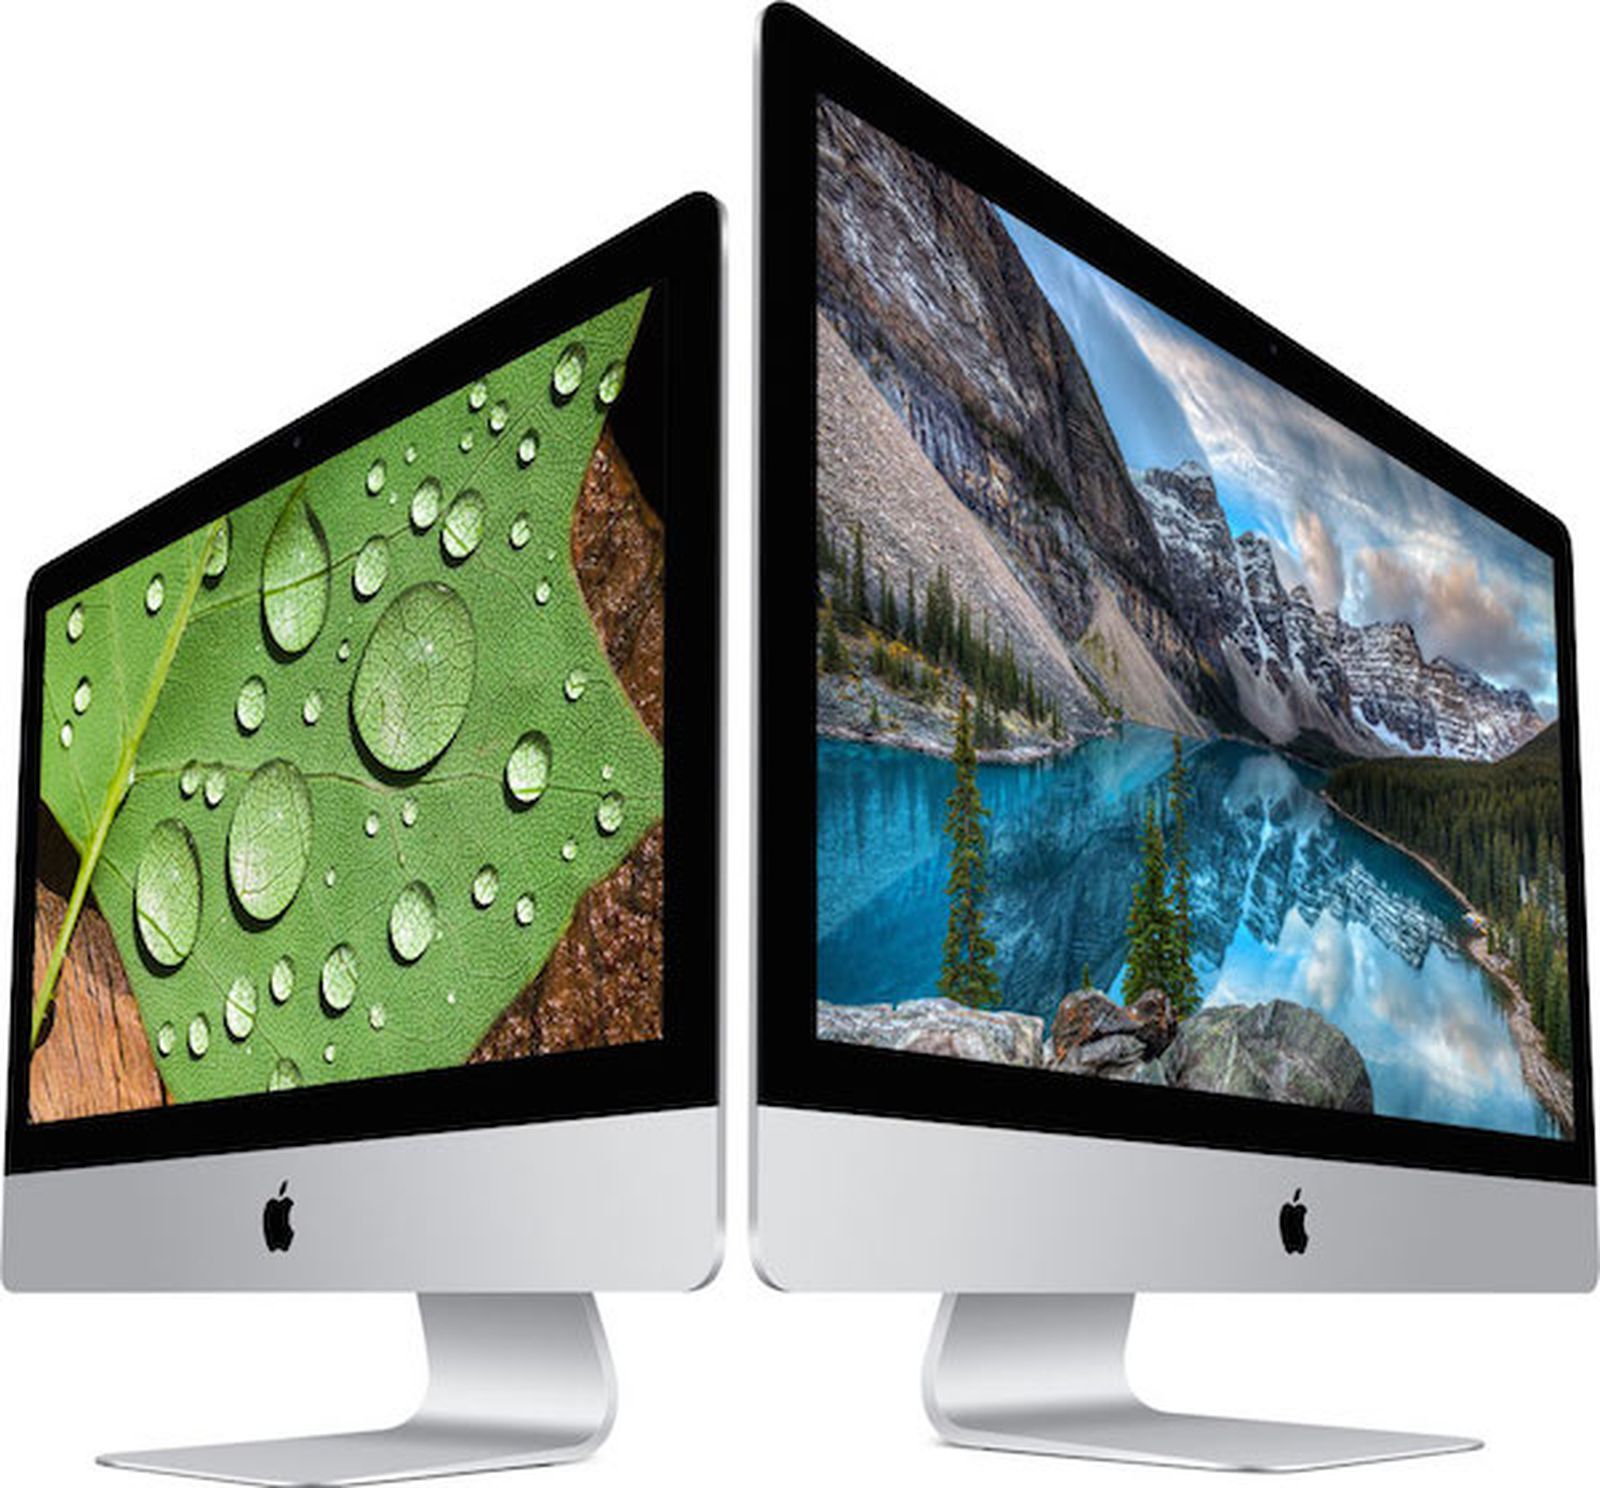 2015 iMac Reviews: 'Best All-in-One' Desktop, But Lacks USB-C and